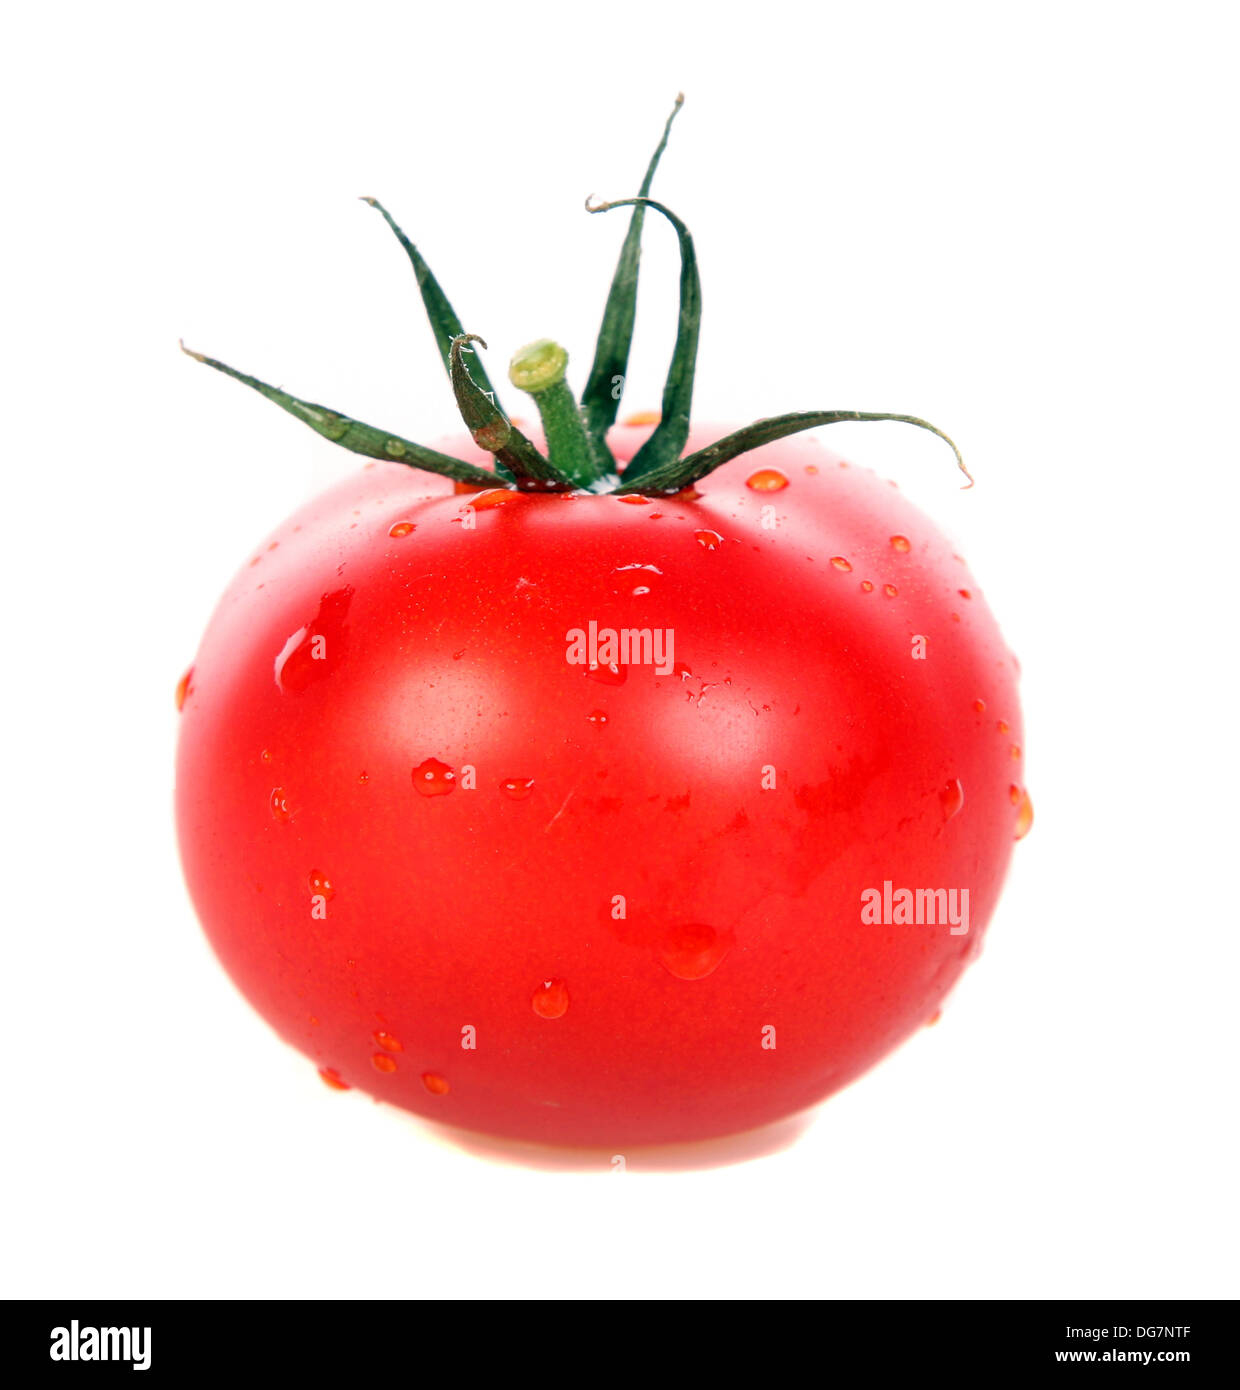 Whole tomato with drops of water Stock Photo